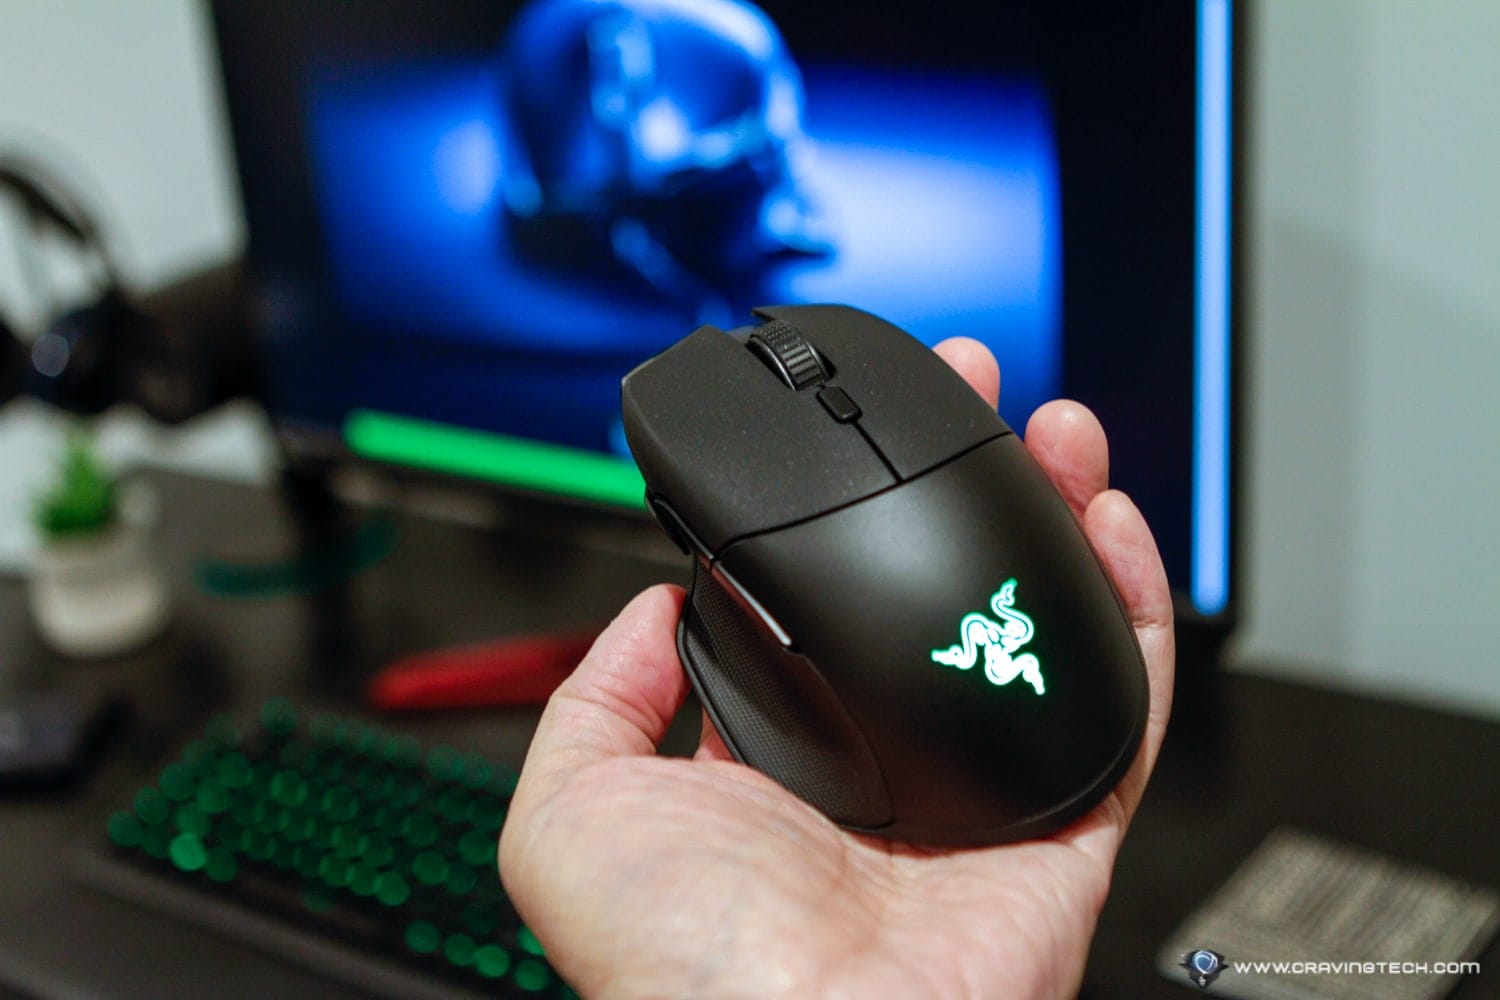 Fragging with less than a AU$100 mouse from Razer – Razer Basilisk Essential Review